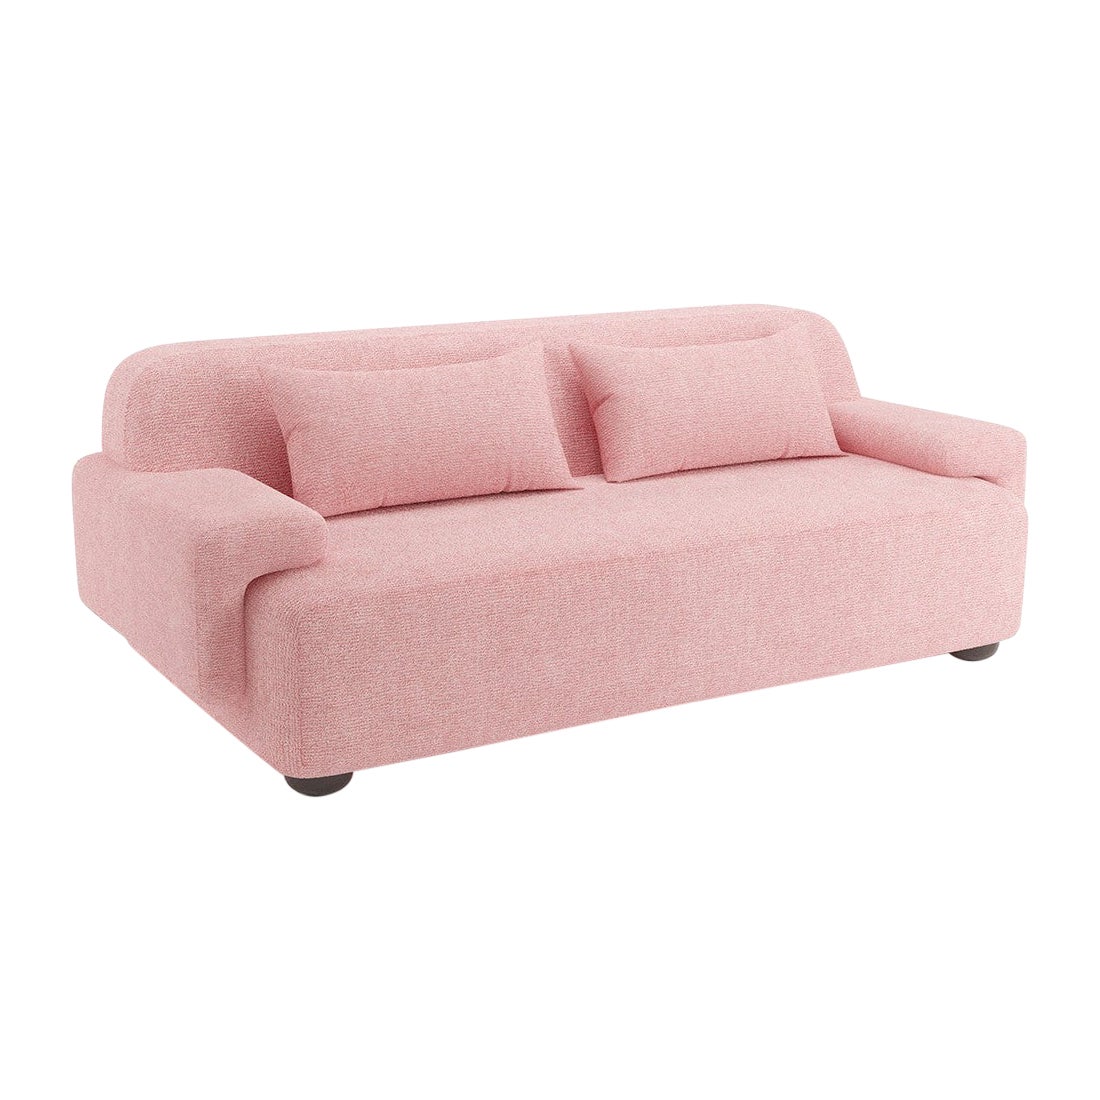 Popus Editions Lena 2.5 Seater Sofa in Pink Megeve Fabric with Knit Effect For Sale